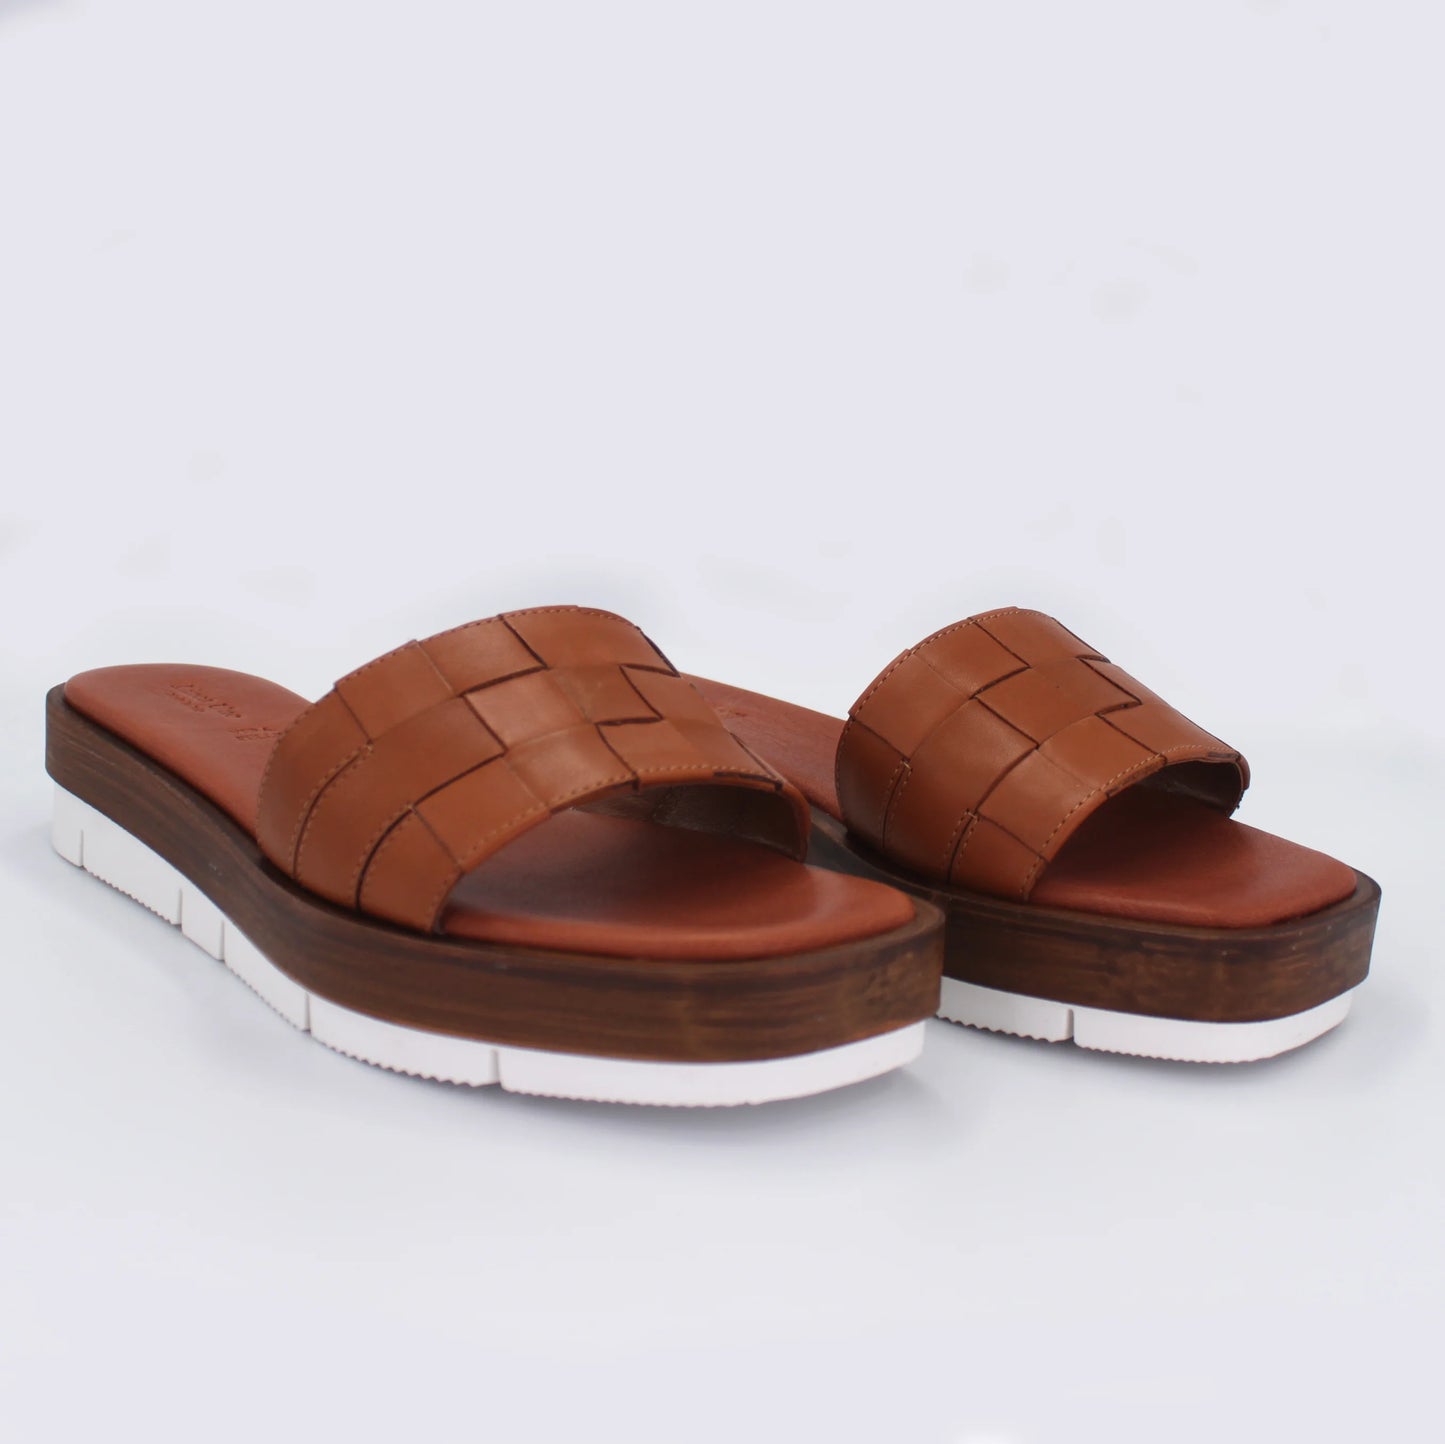 Shop Handmade Italian Leather Sandal in Cognac (2150) or browse our range of hand-made Italian sandals for women in leather or suede in-store at Aliverti Durban or Cape Town, or shop online. We deliver in South Africa & offer multiple payment plans as well as accept multiple safe & secure payment methods.